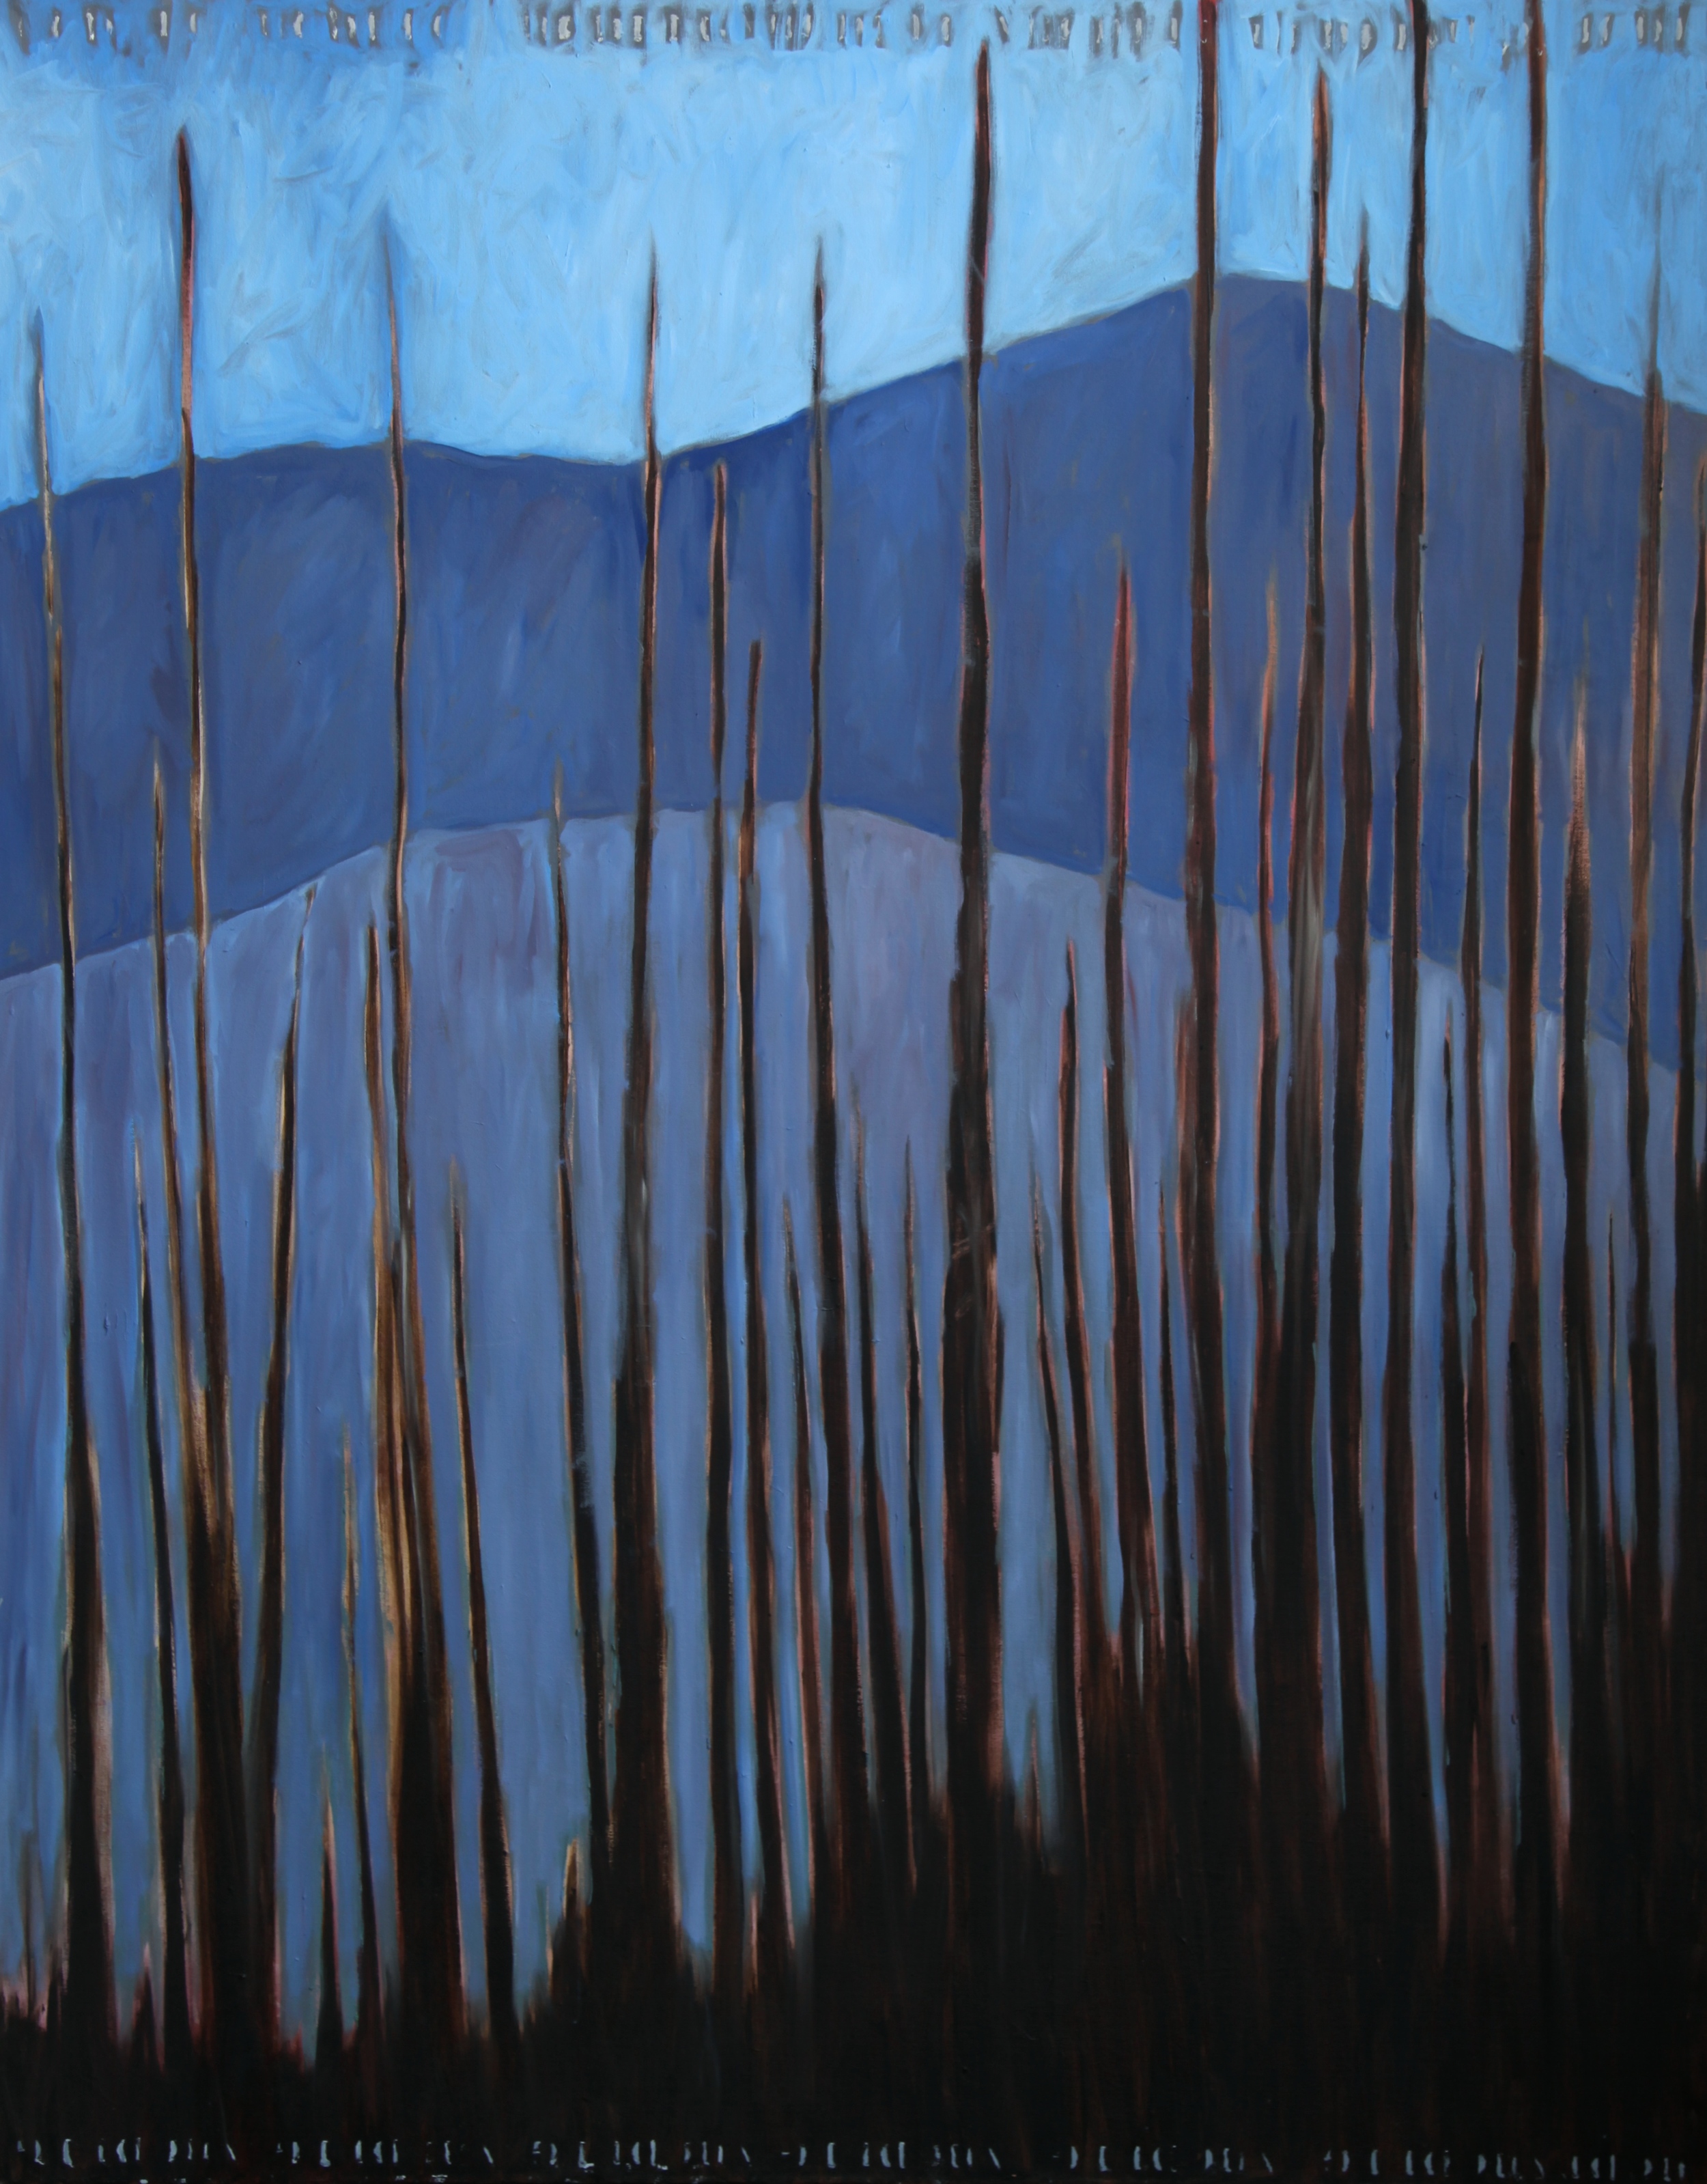   Blue Mountains   oil on canvas  60" x 48"  2005  sold   